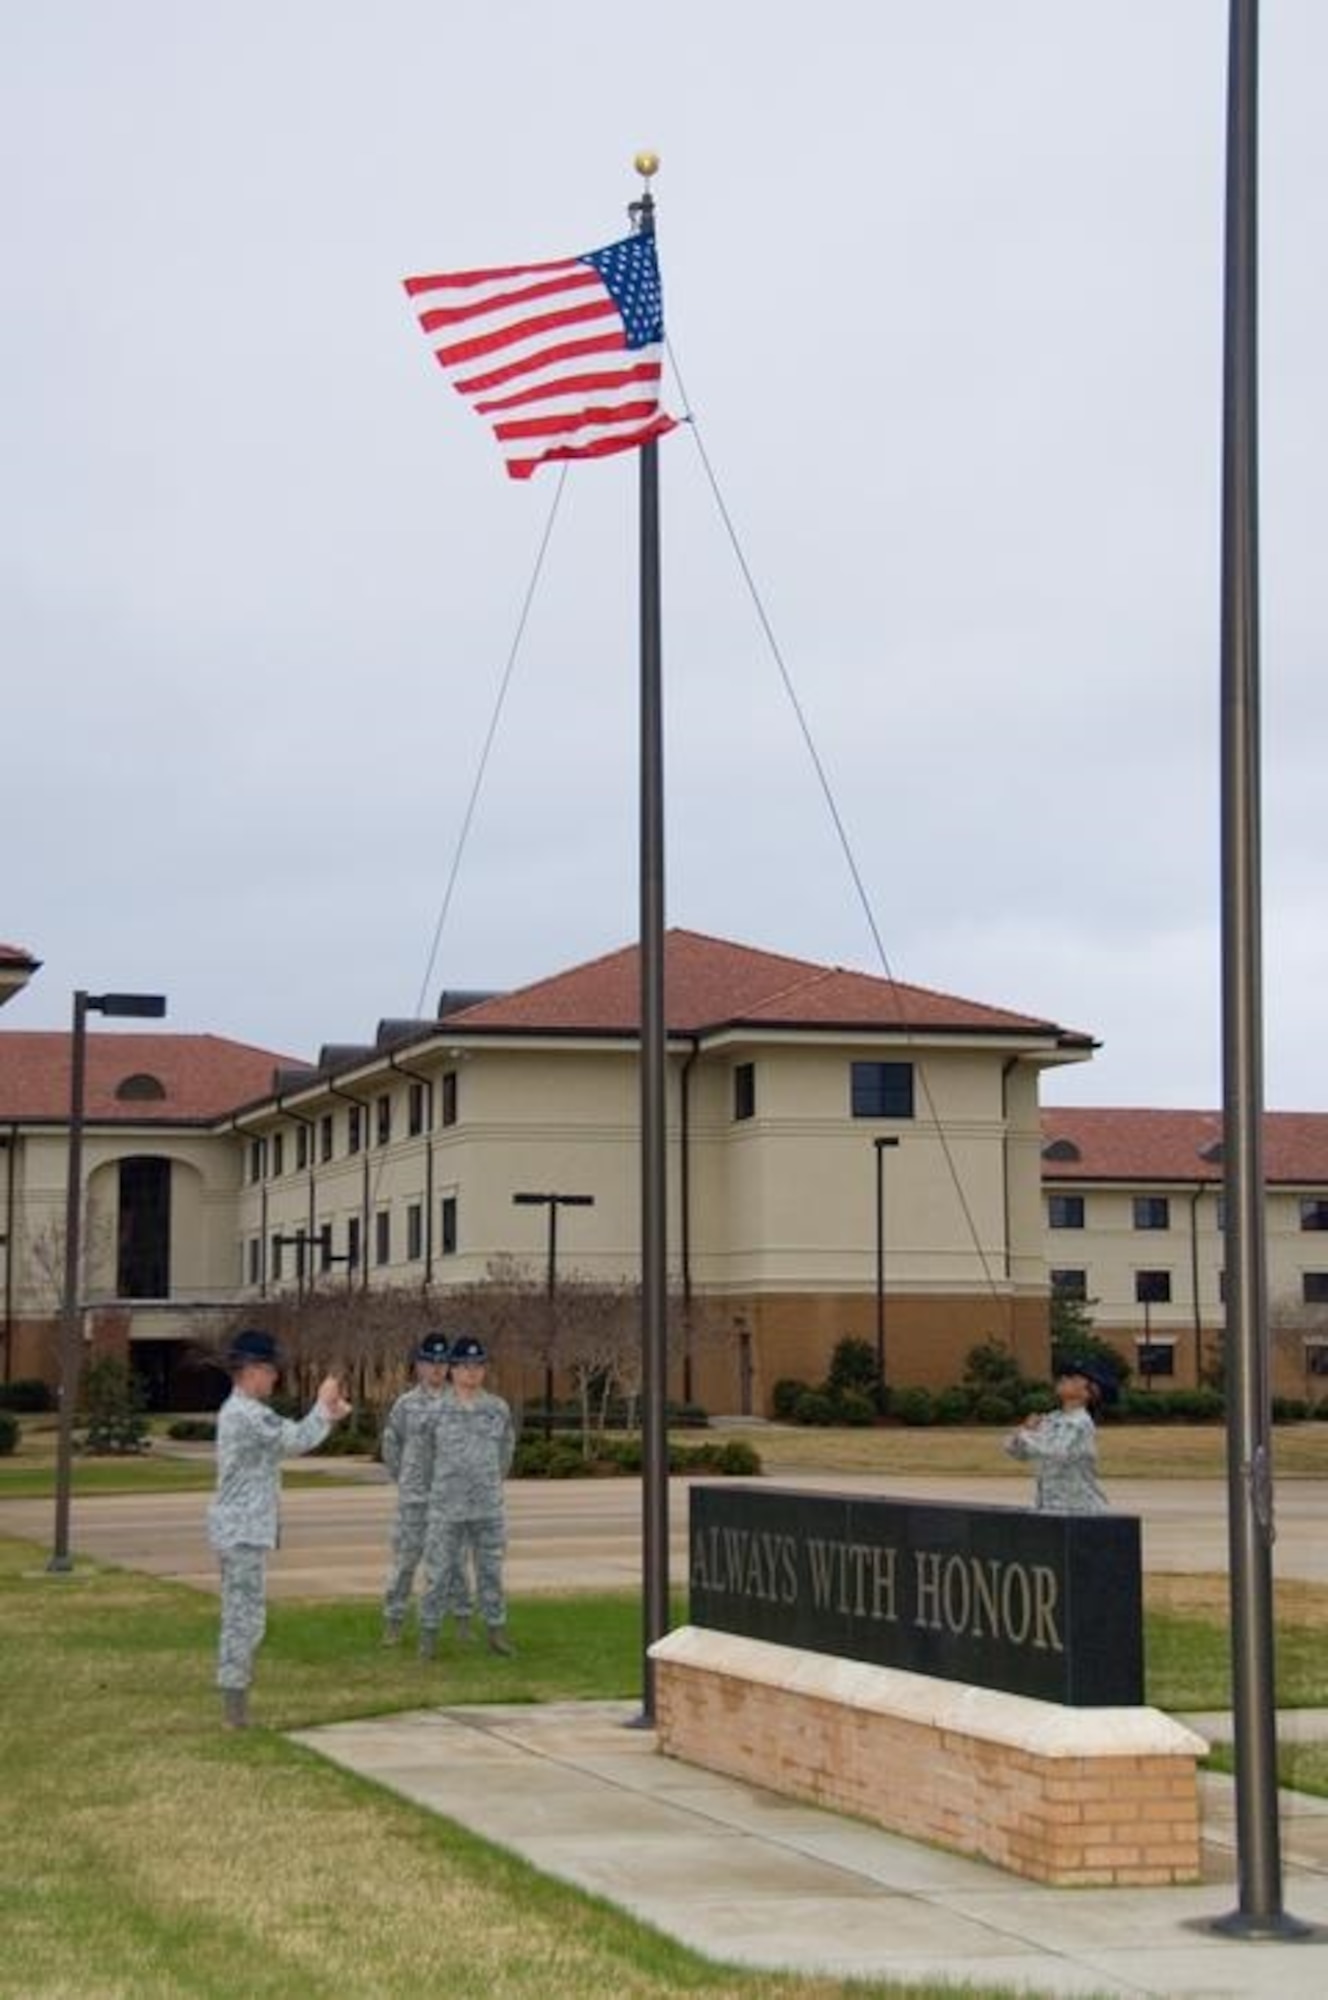 U.S. Air Force training instructors lower the American flag during a retreat ceremony for the Officer Training School's 50th Anniversary weekend celebration at Welch parade field on Maxwell-Gunter Air Force Base, Ala., Feb 5, 2010. (U.S. Air Force photo by Melanie Rodgers Cox/Released)